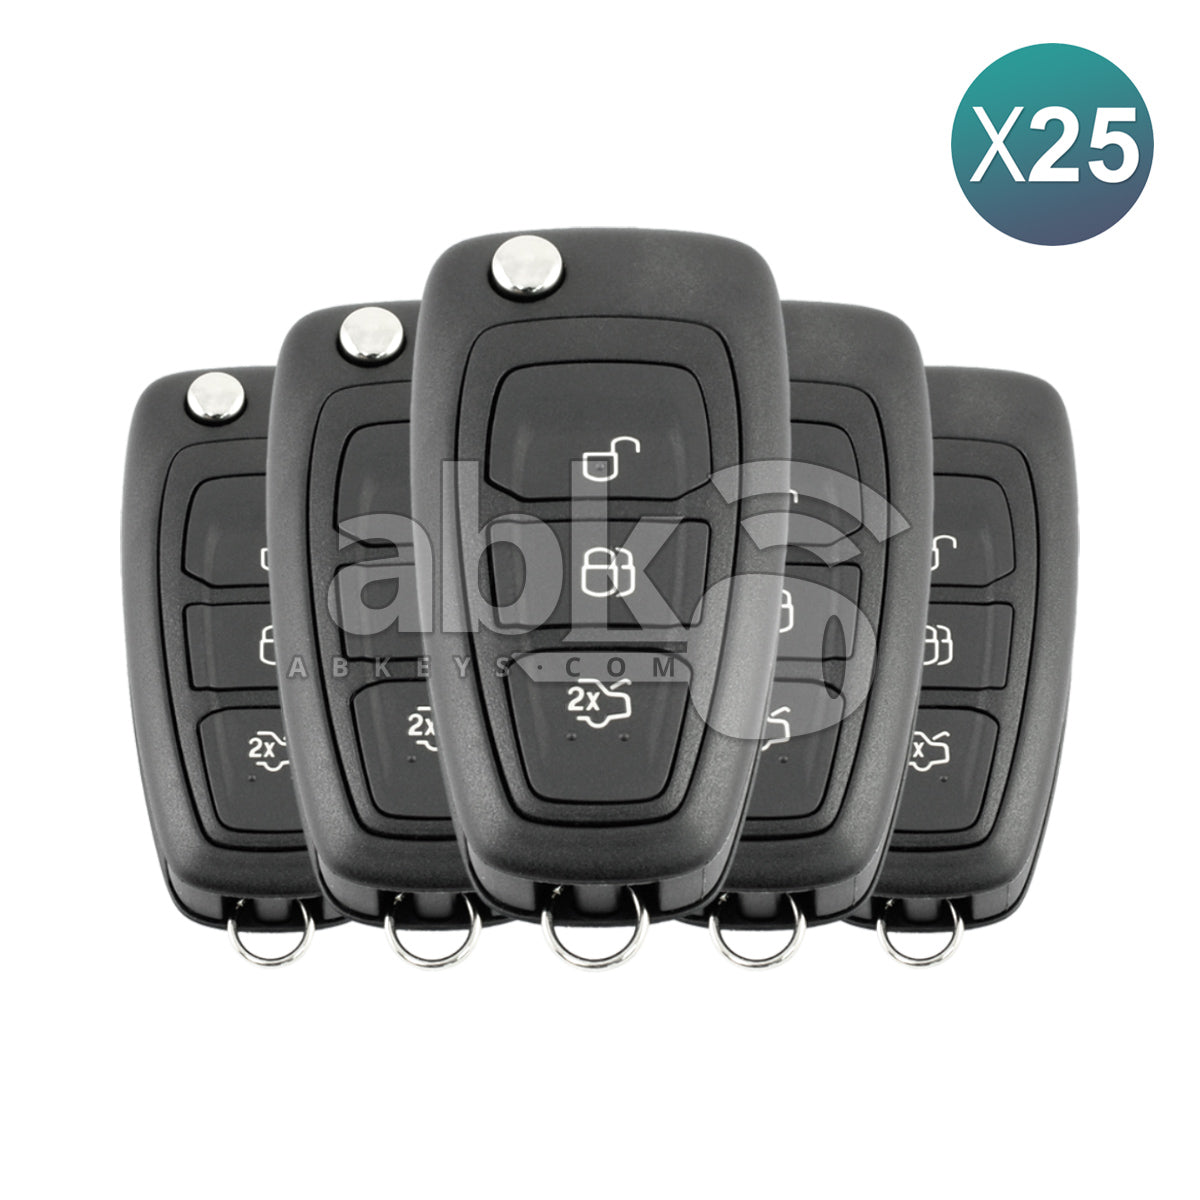 Ford Focus Mondeo C-Max 2010+ Remote Key 25Pcs Offer 3Buttons 5WK49986 434MHz HU101 2180803 1743826